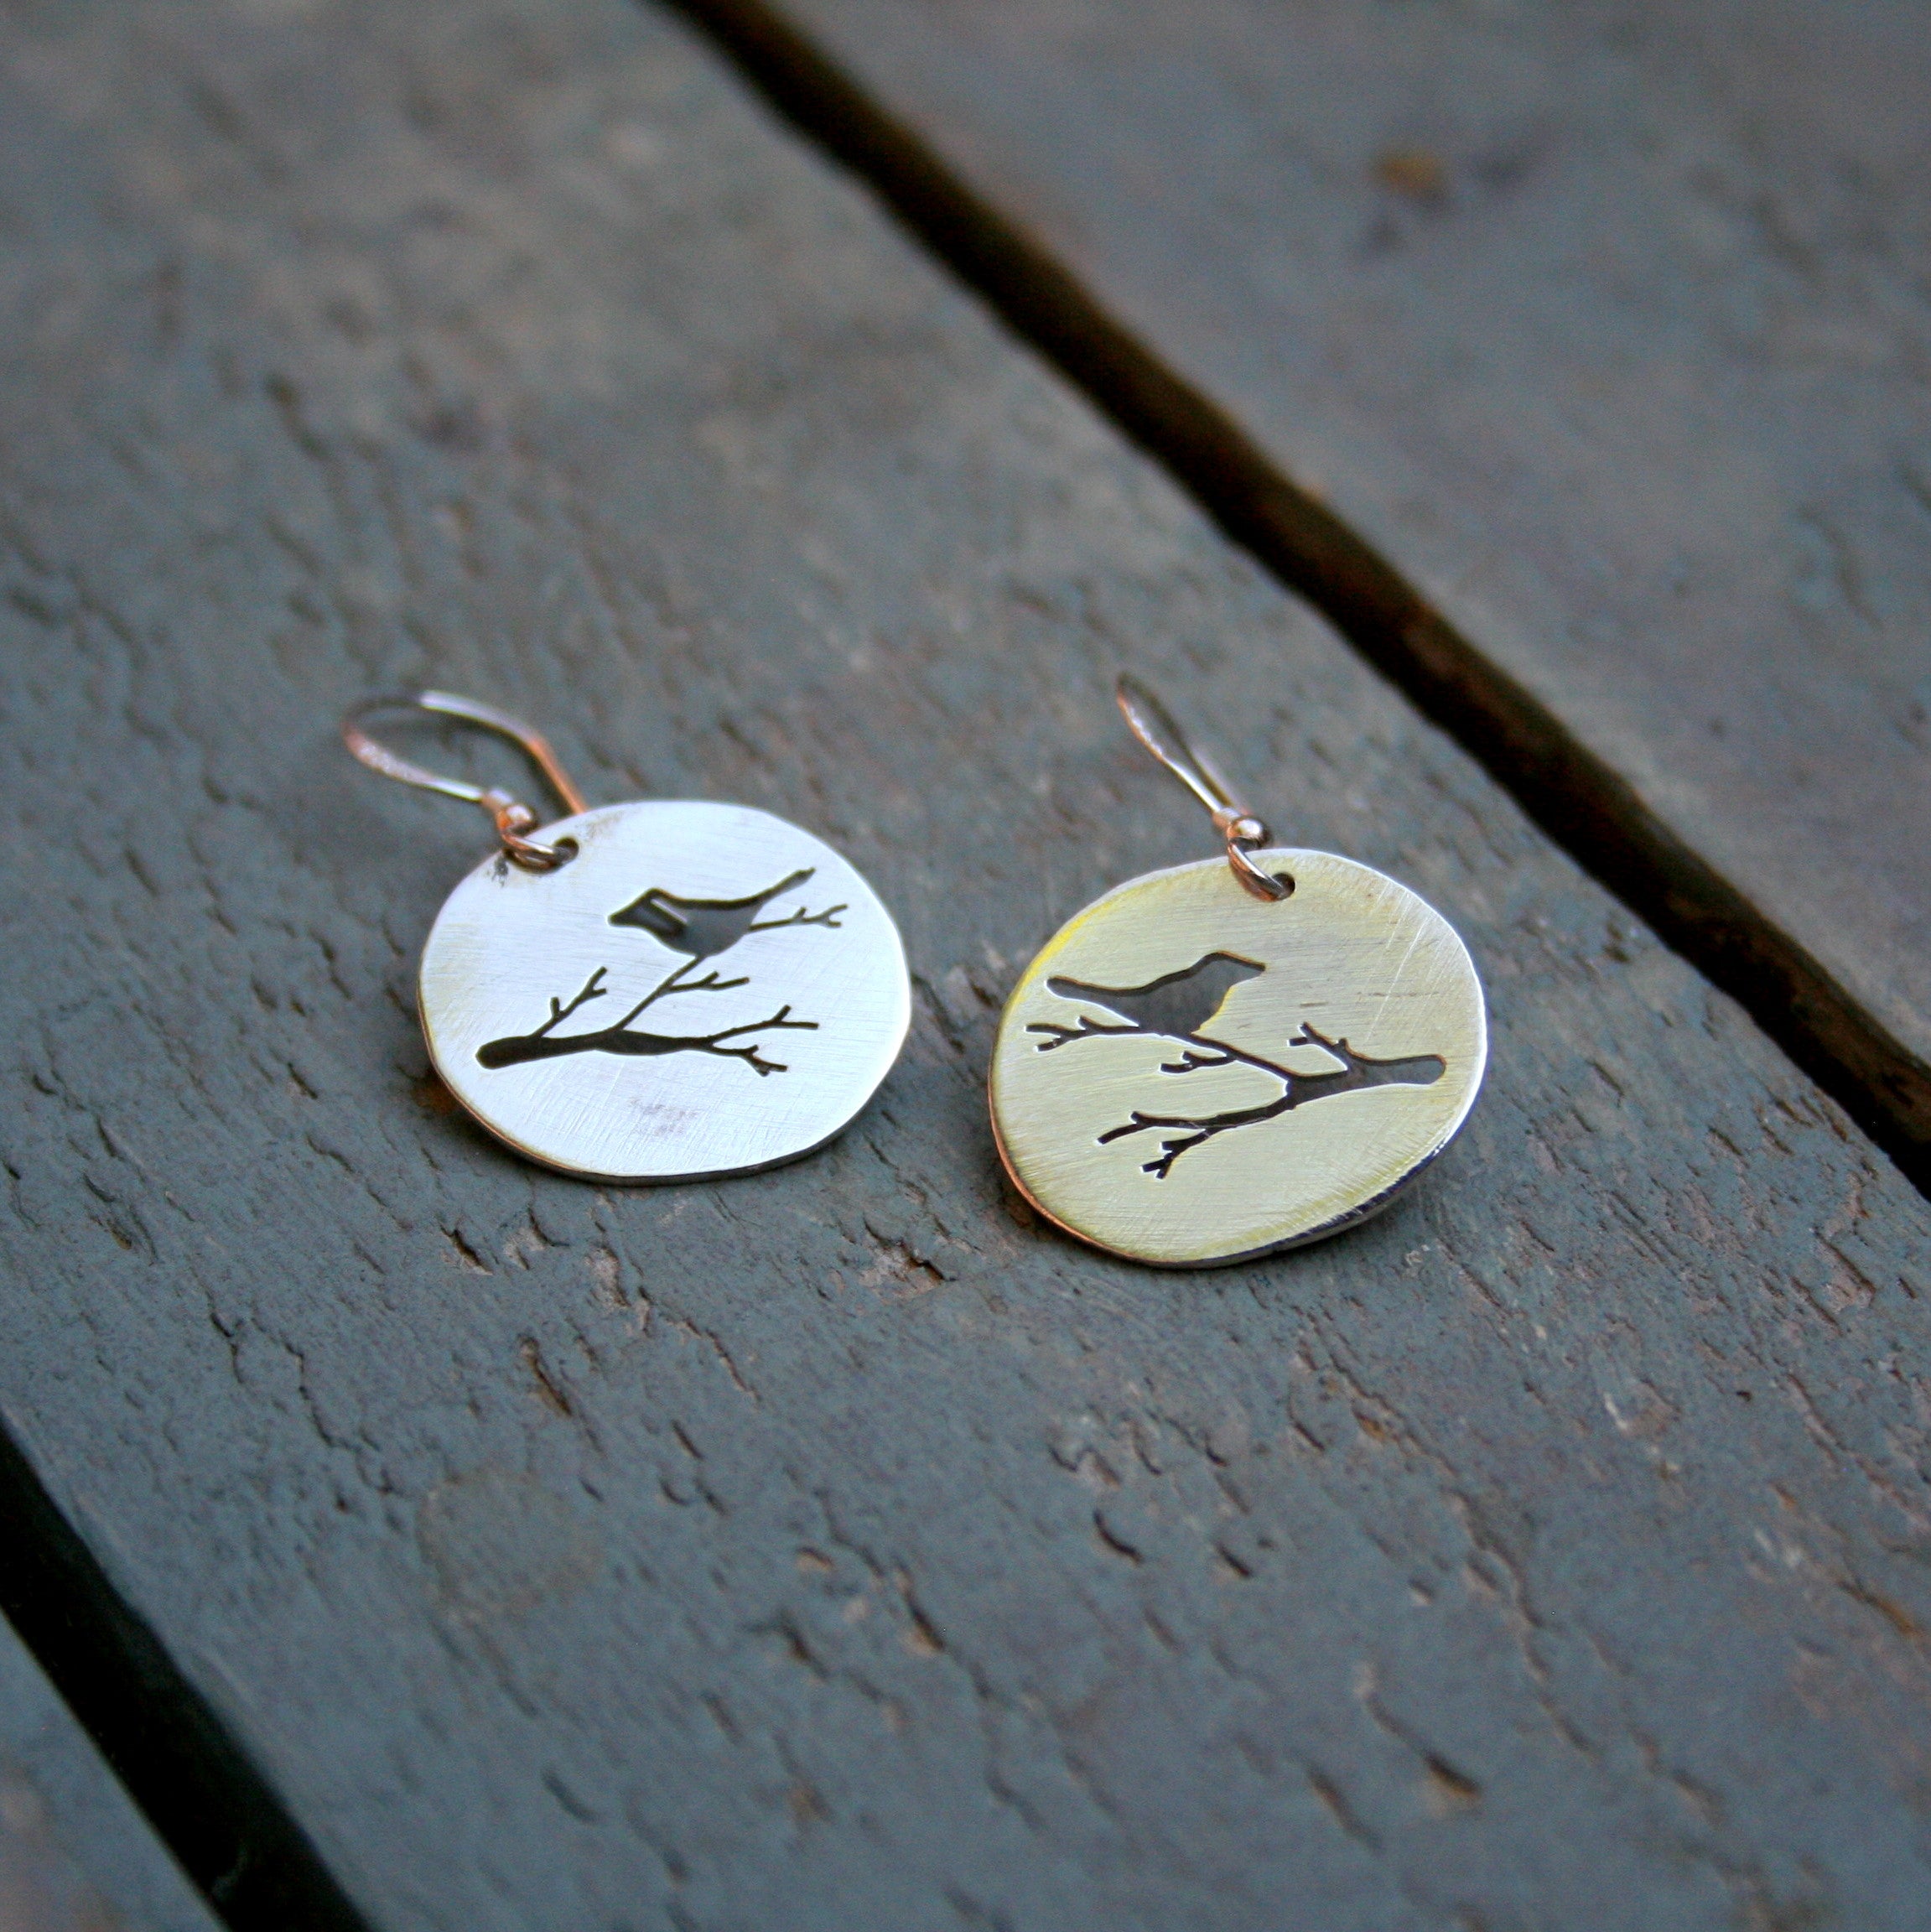 Bird on a branch silhouette hand pierced in an oval sterling silver disc on sterling silver shepherd hooks.  Please note that all pieces are handmade by Erfdeel Juwele on order. Allow up to two weeks for manufacture.